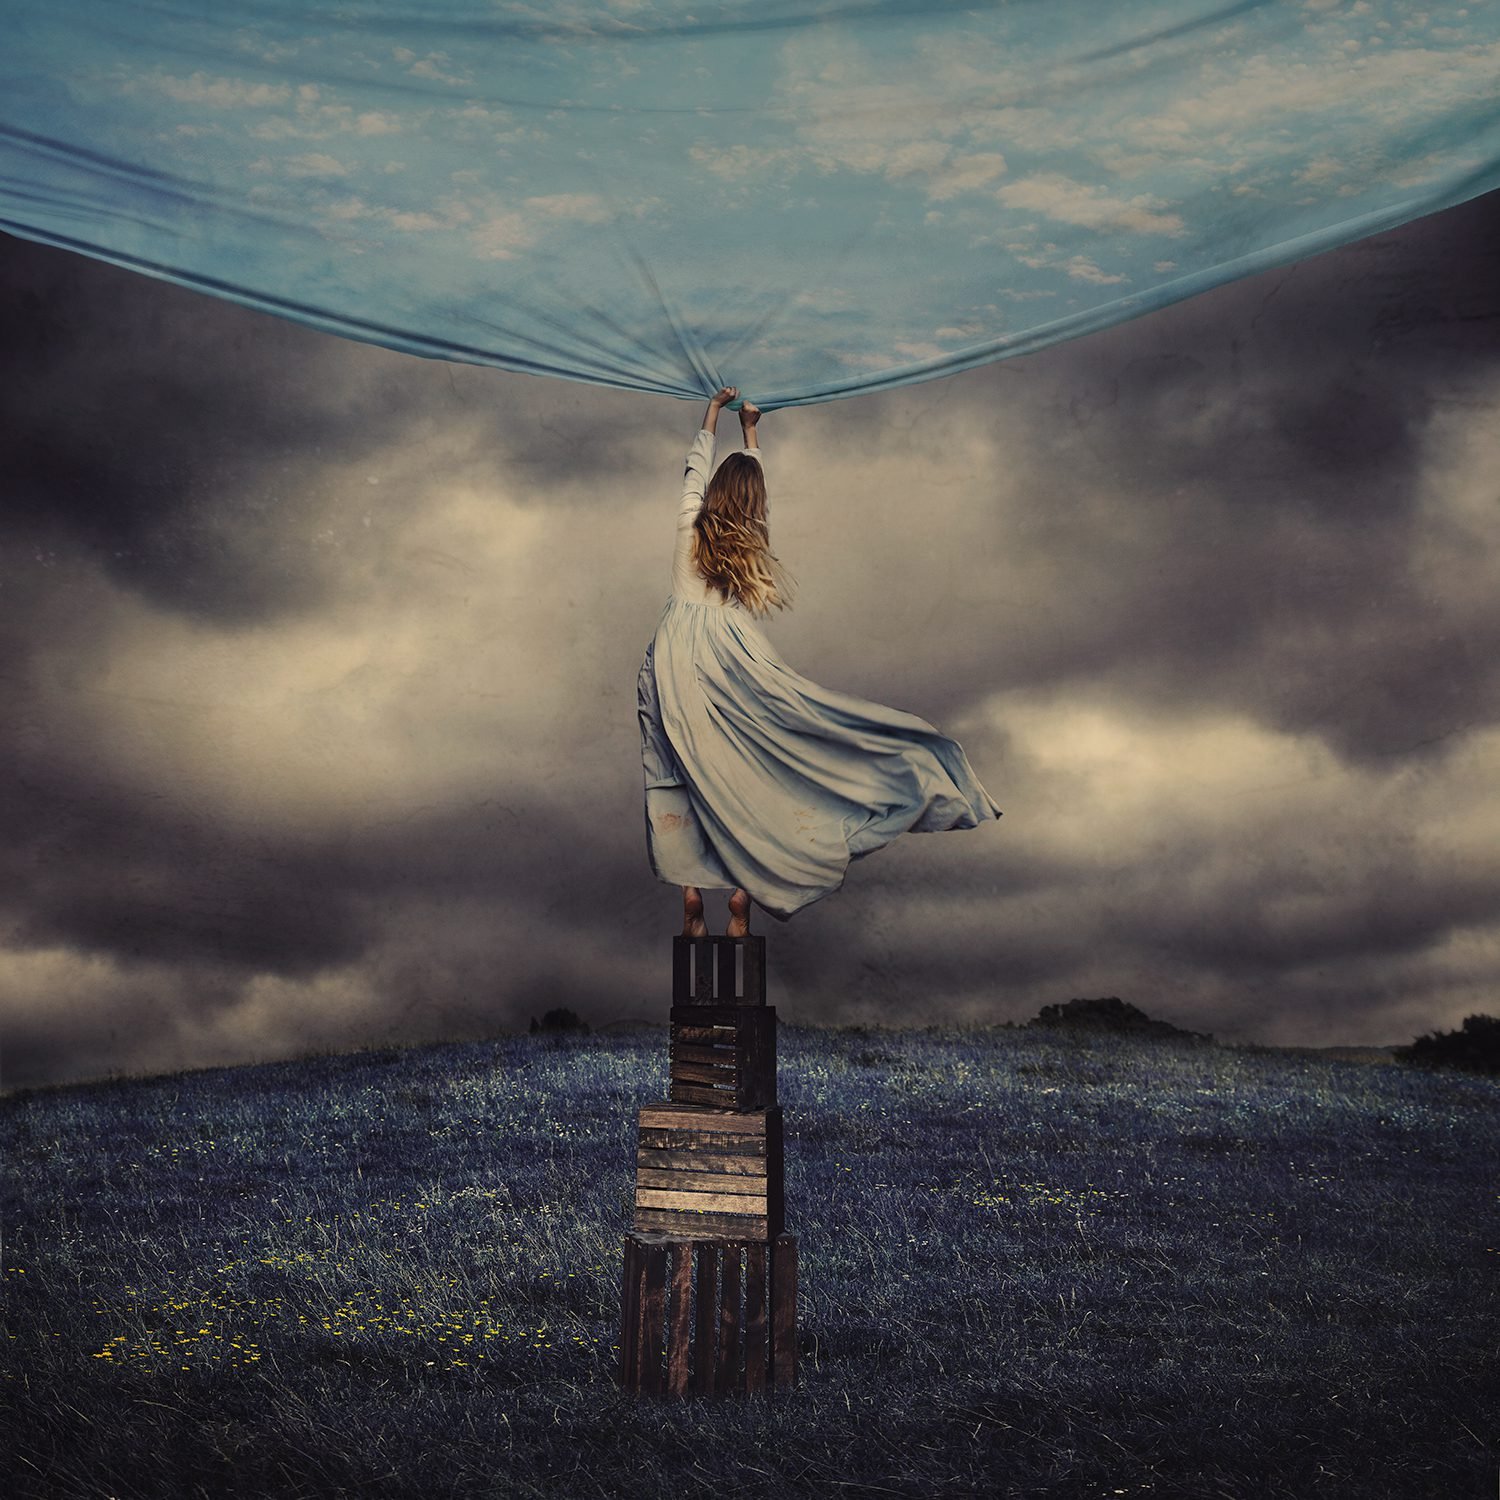 Catharsis by Brooke Shaden